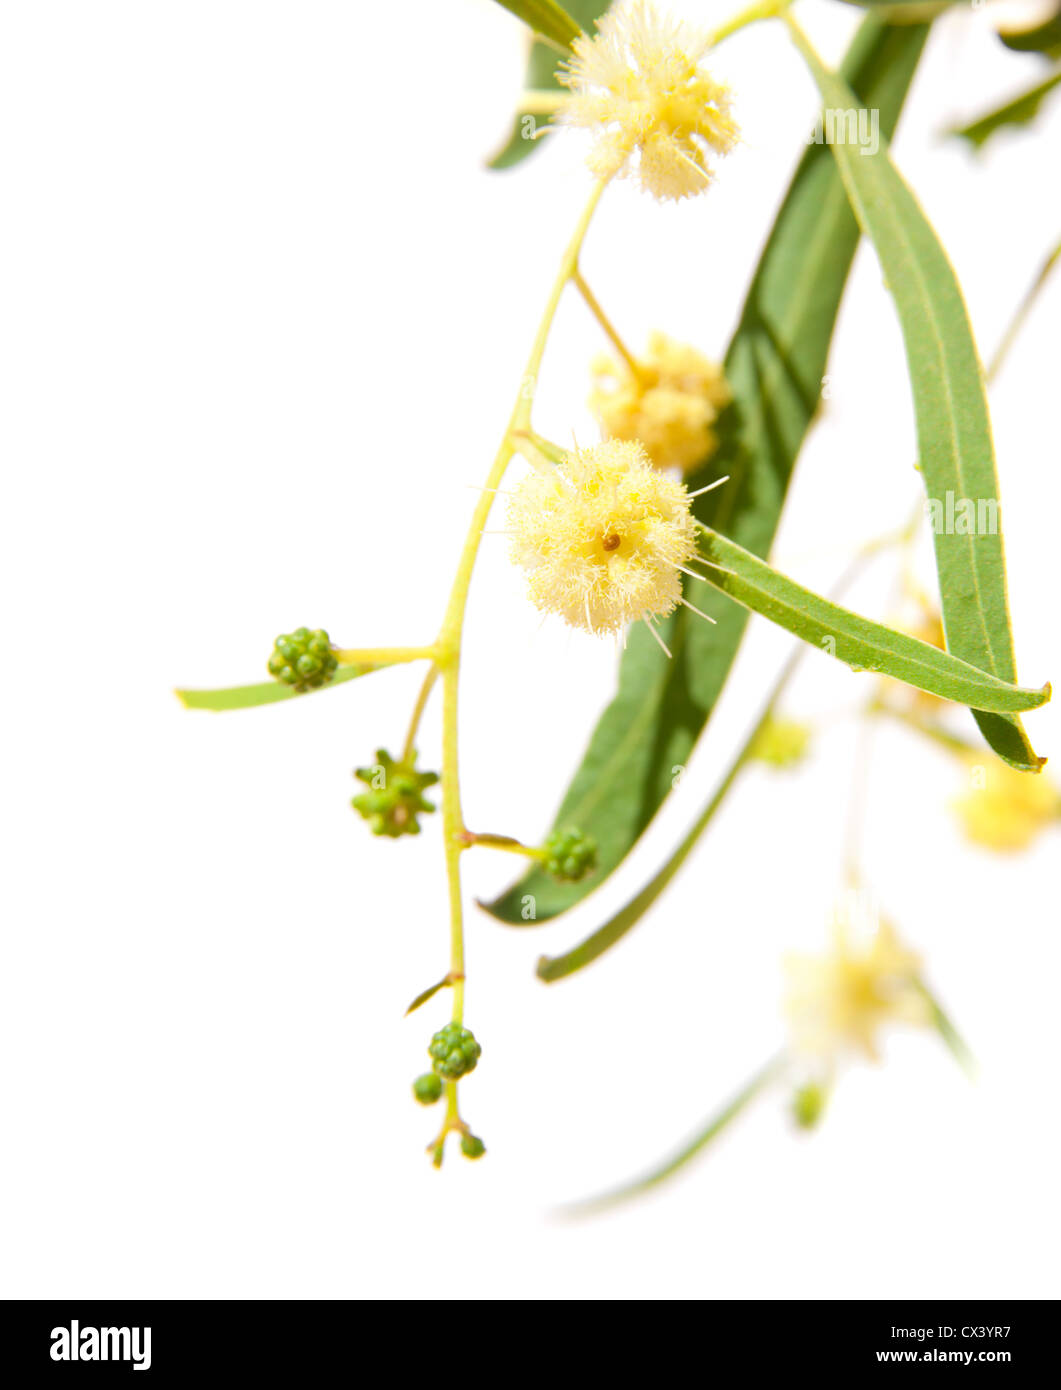 Acacia branches with flowers isolated on white Stock Photo